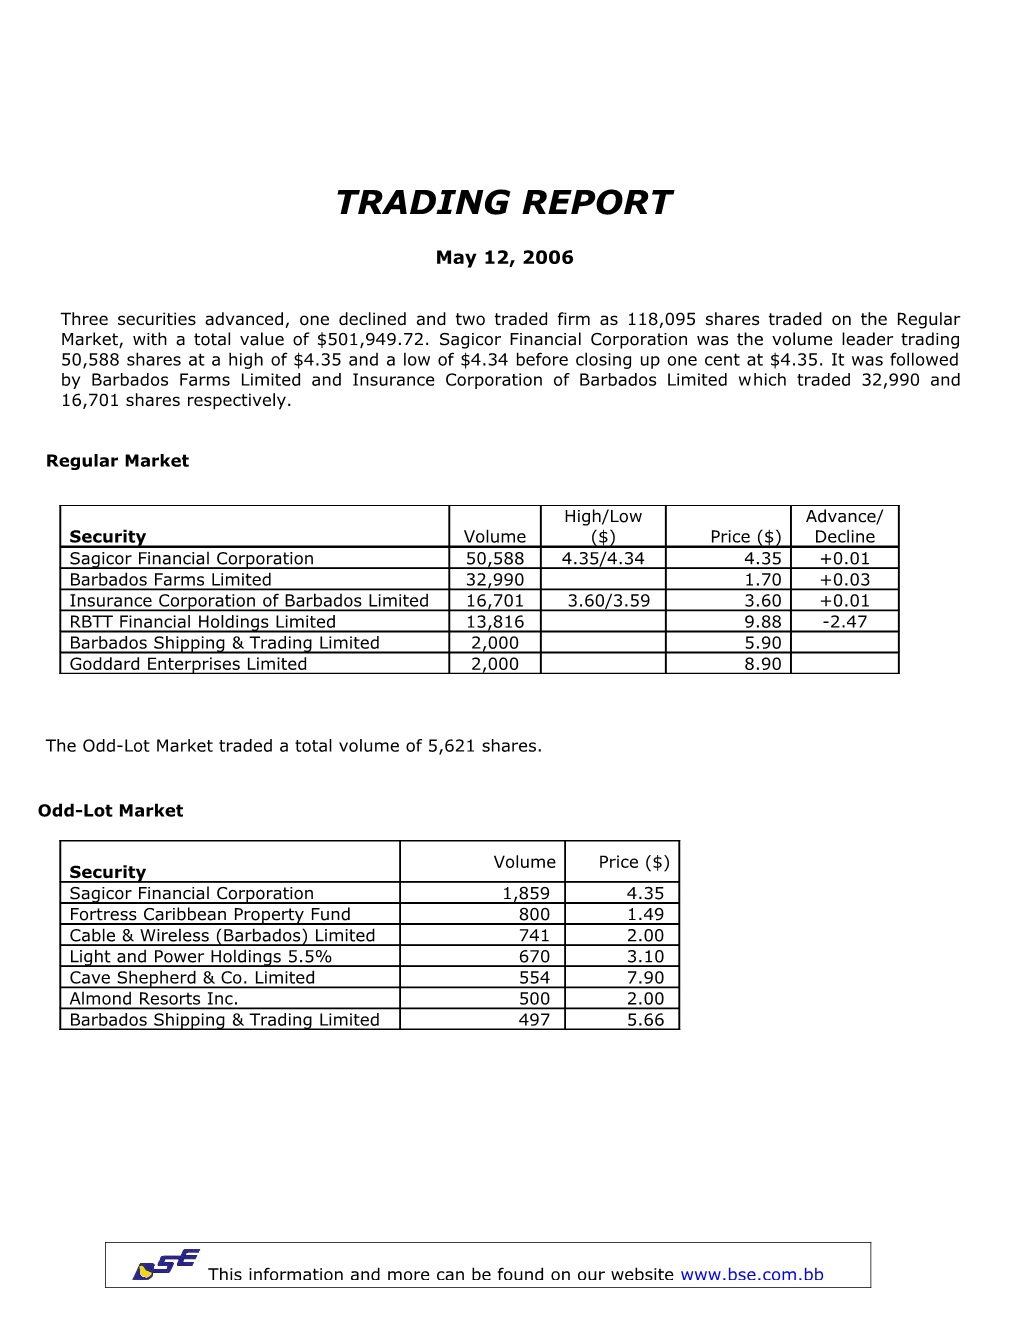 The Odd-Lot Market Traded a Total Volume of 5,621Shares